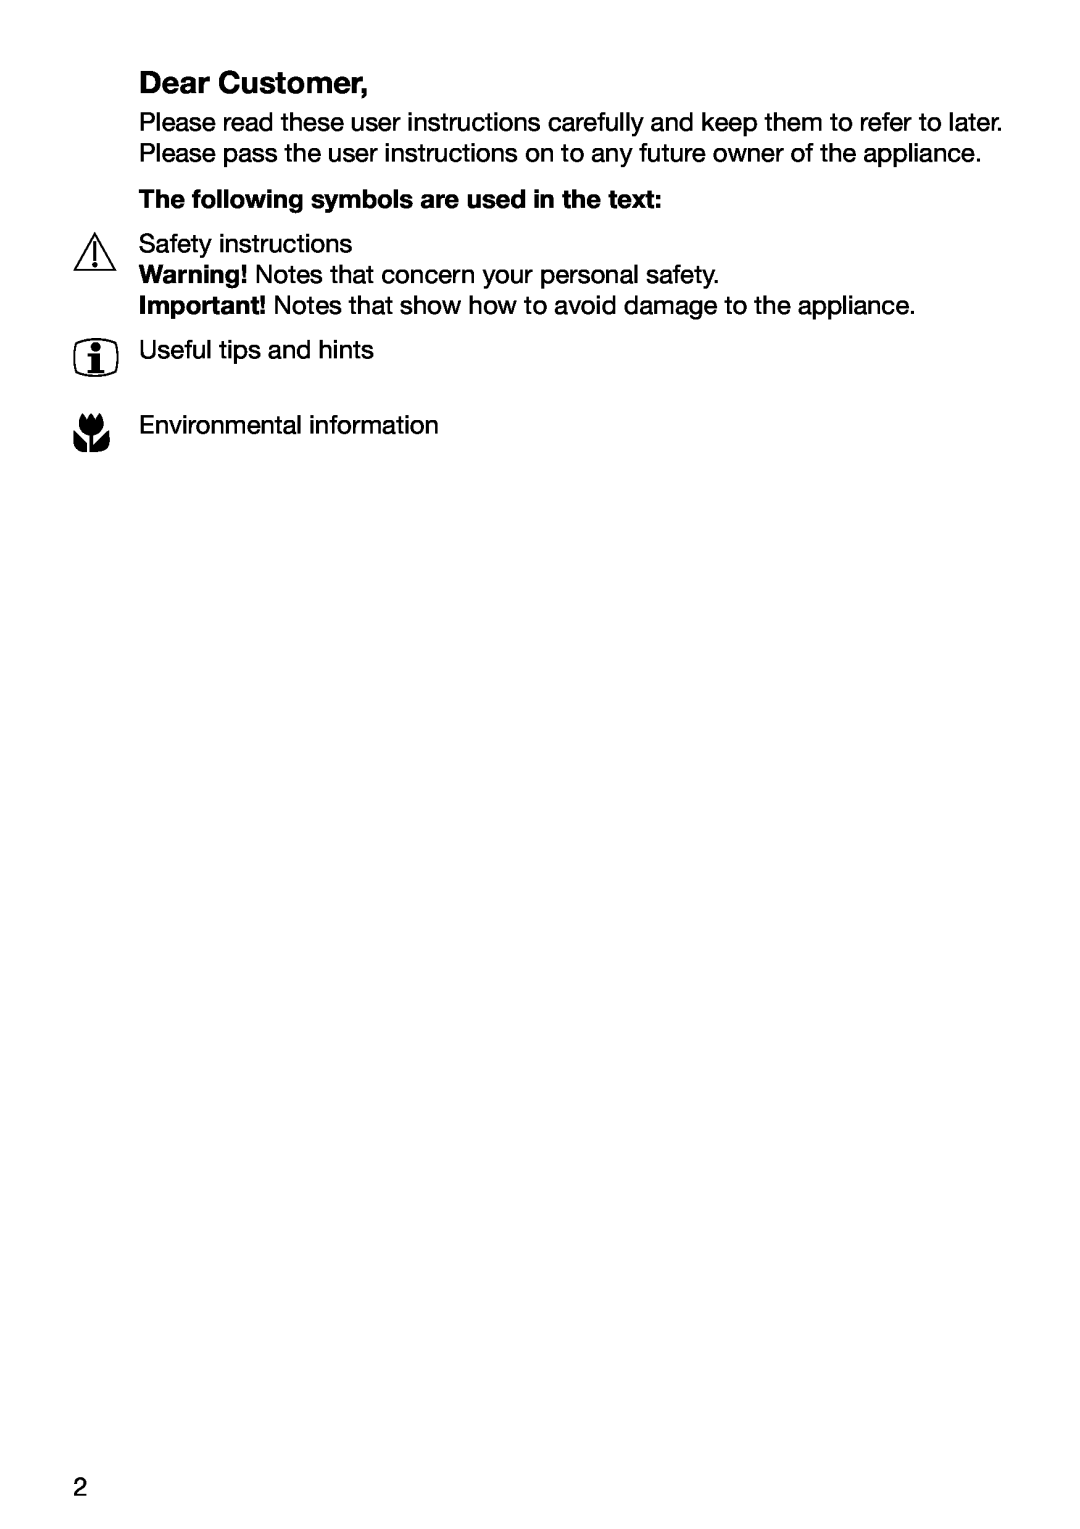 Electrolux TBC 651 X installation instructions Dear Customer, The following symbols are used in the text 